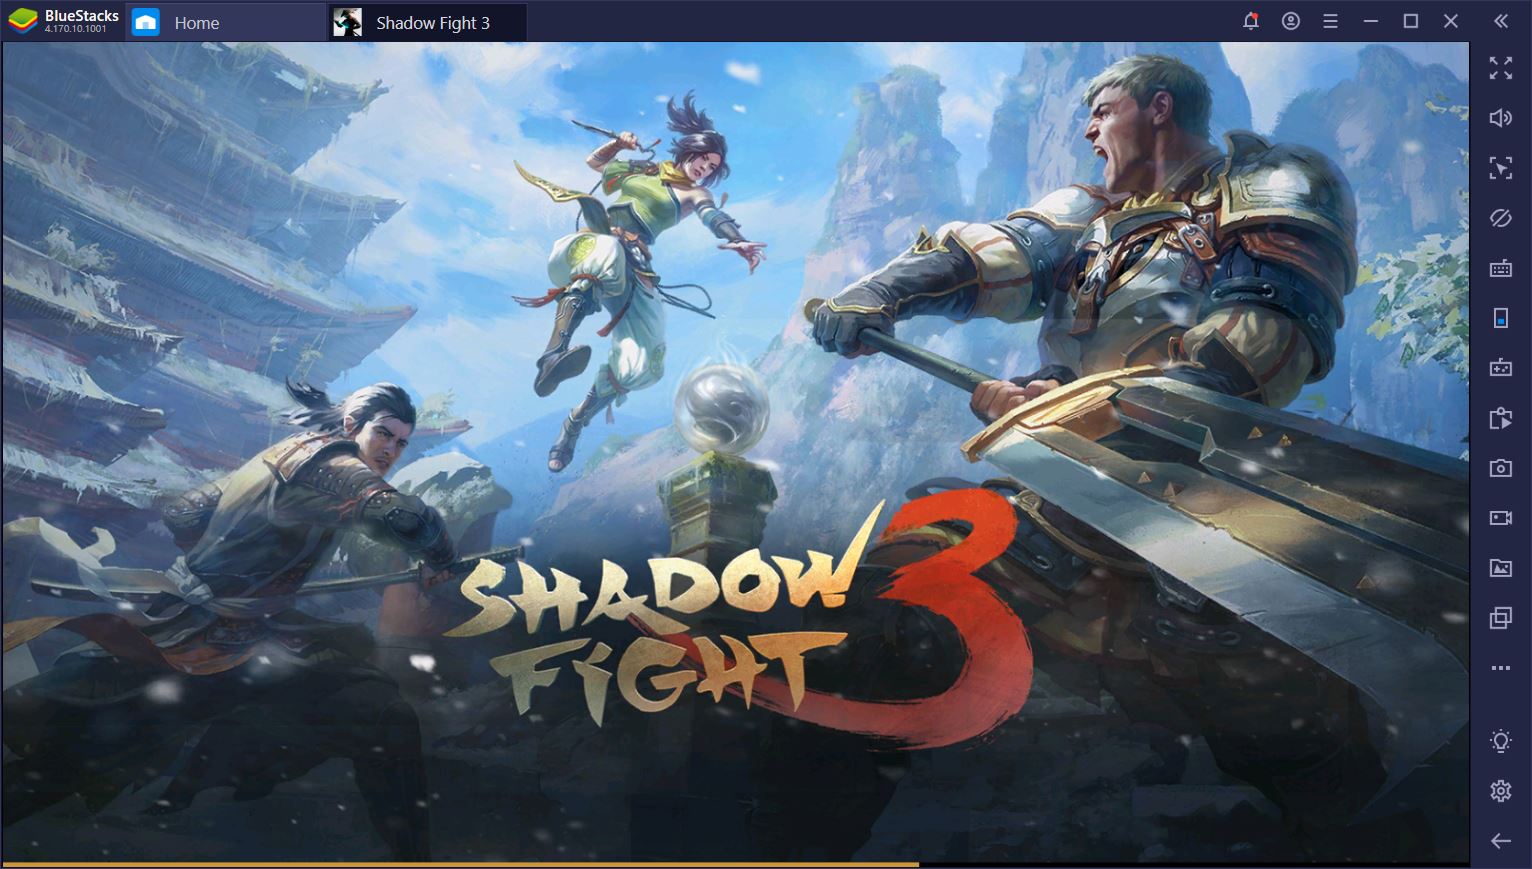 is shadow fight 3 available for pc